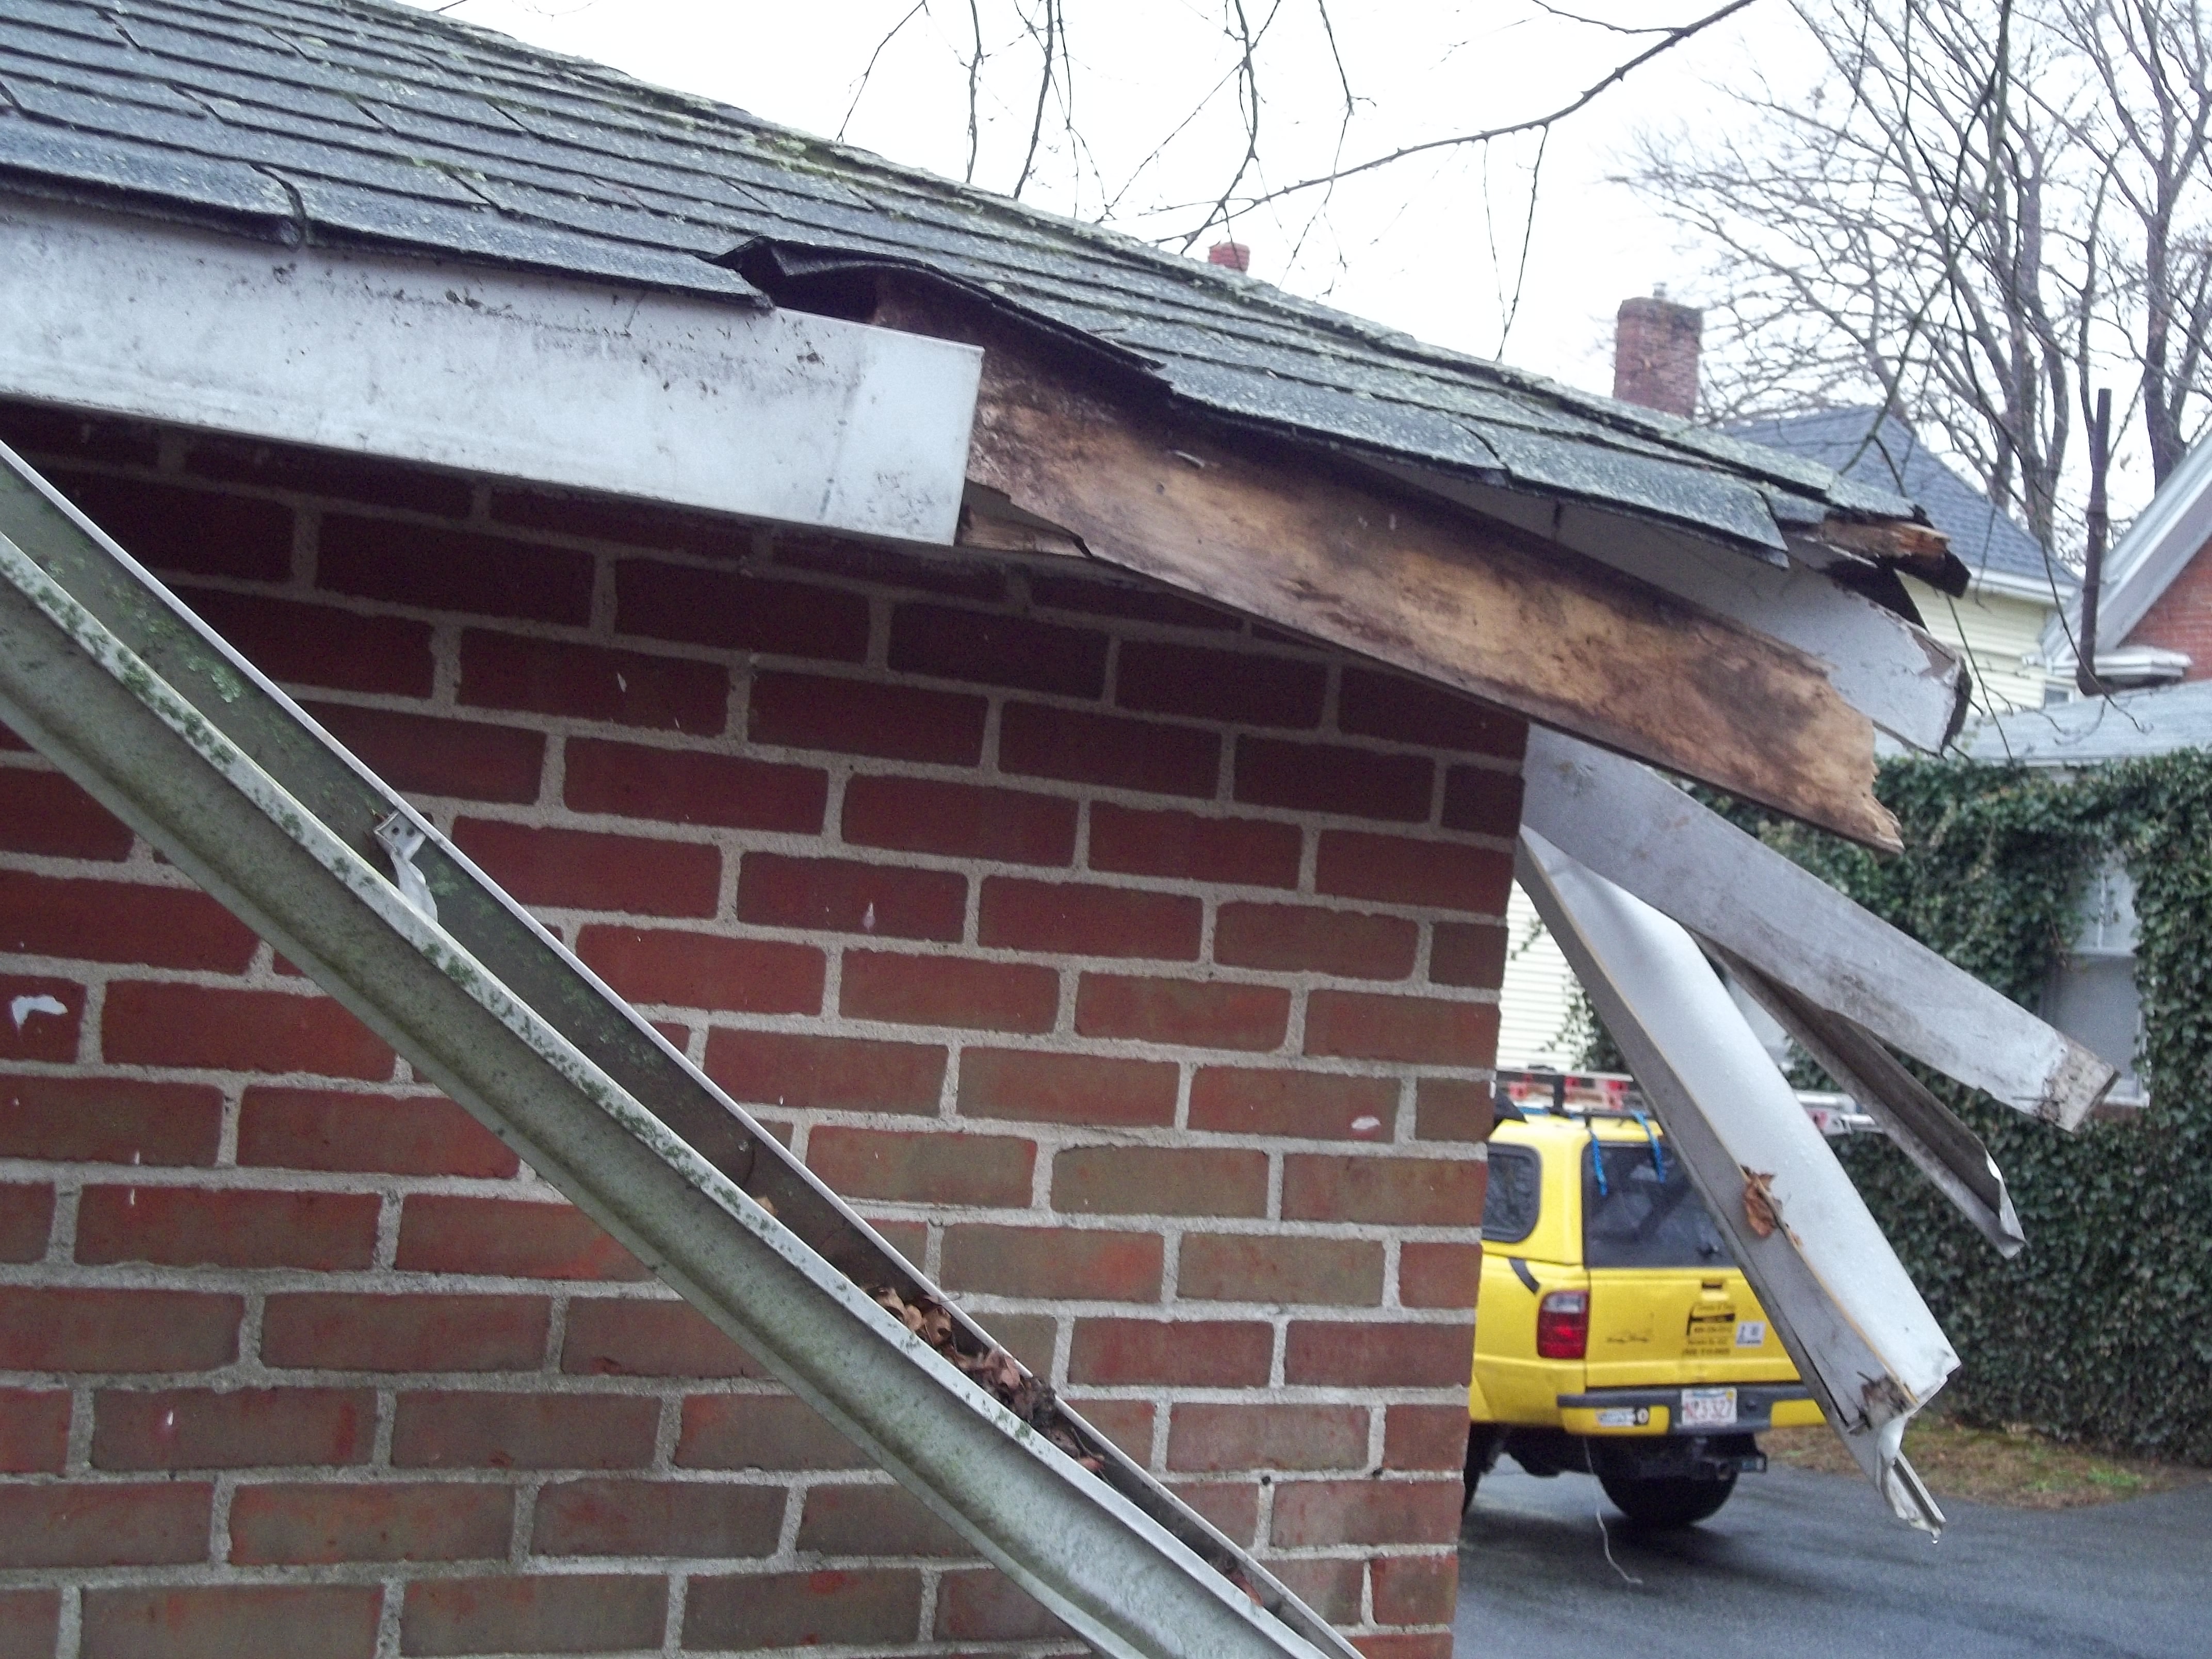 Damaged Gutters Roofing Skylight Siding Chimney Repair Ferreira Company